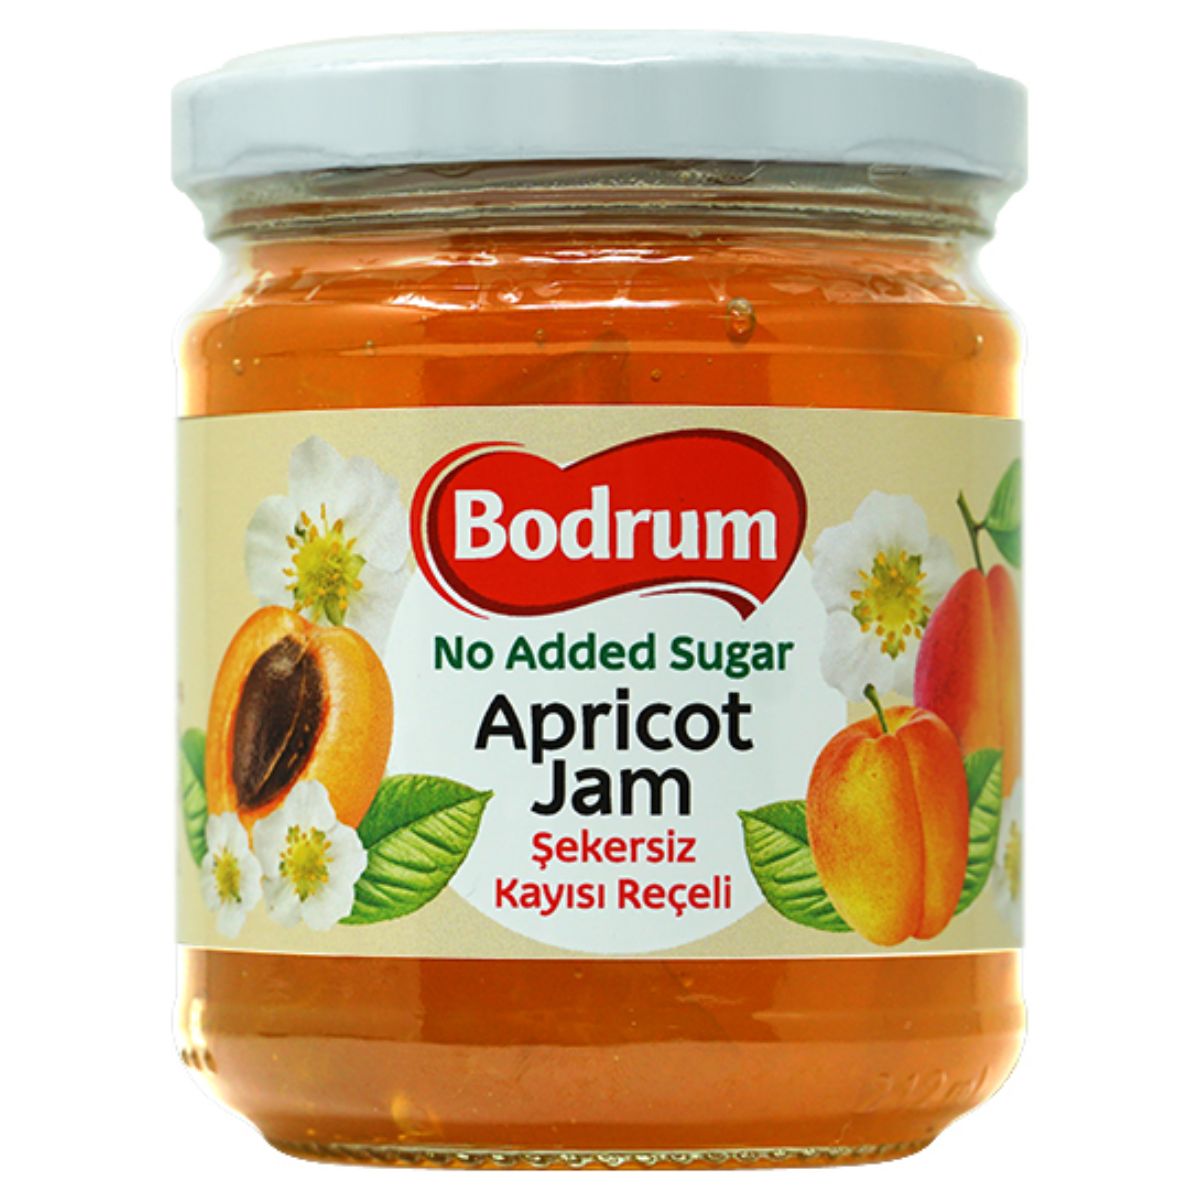 A jar of Bodrum - Apricot Jam - 240g with no added sugar.